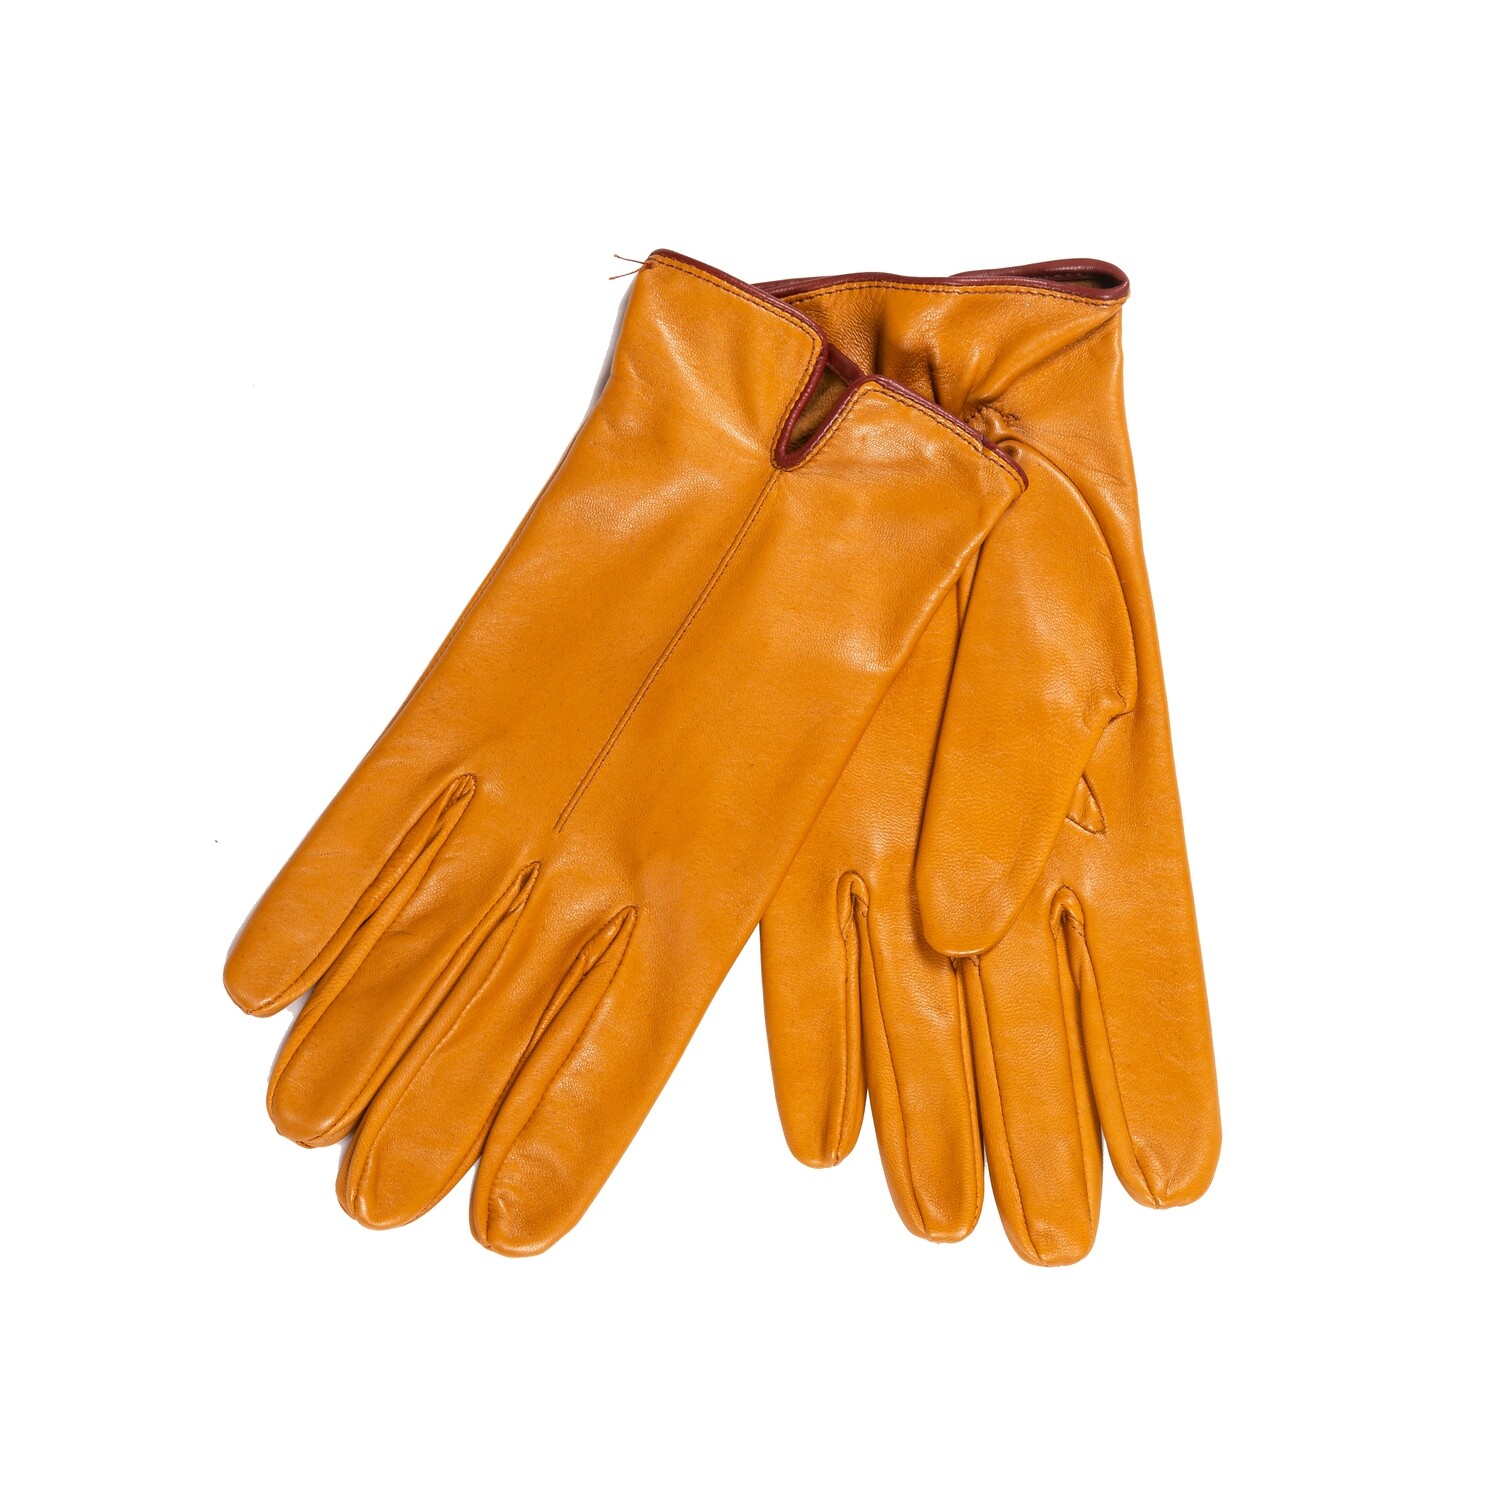 Dents Mustard Leather Gloves